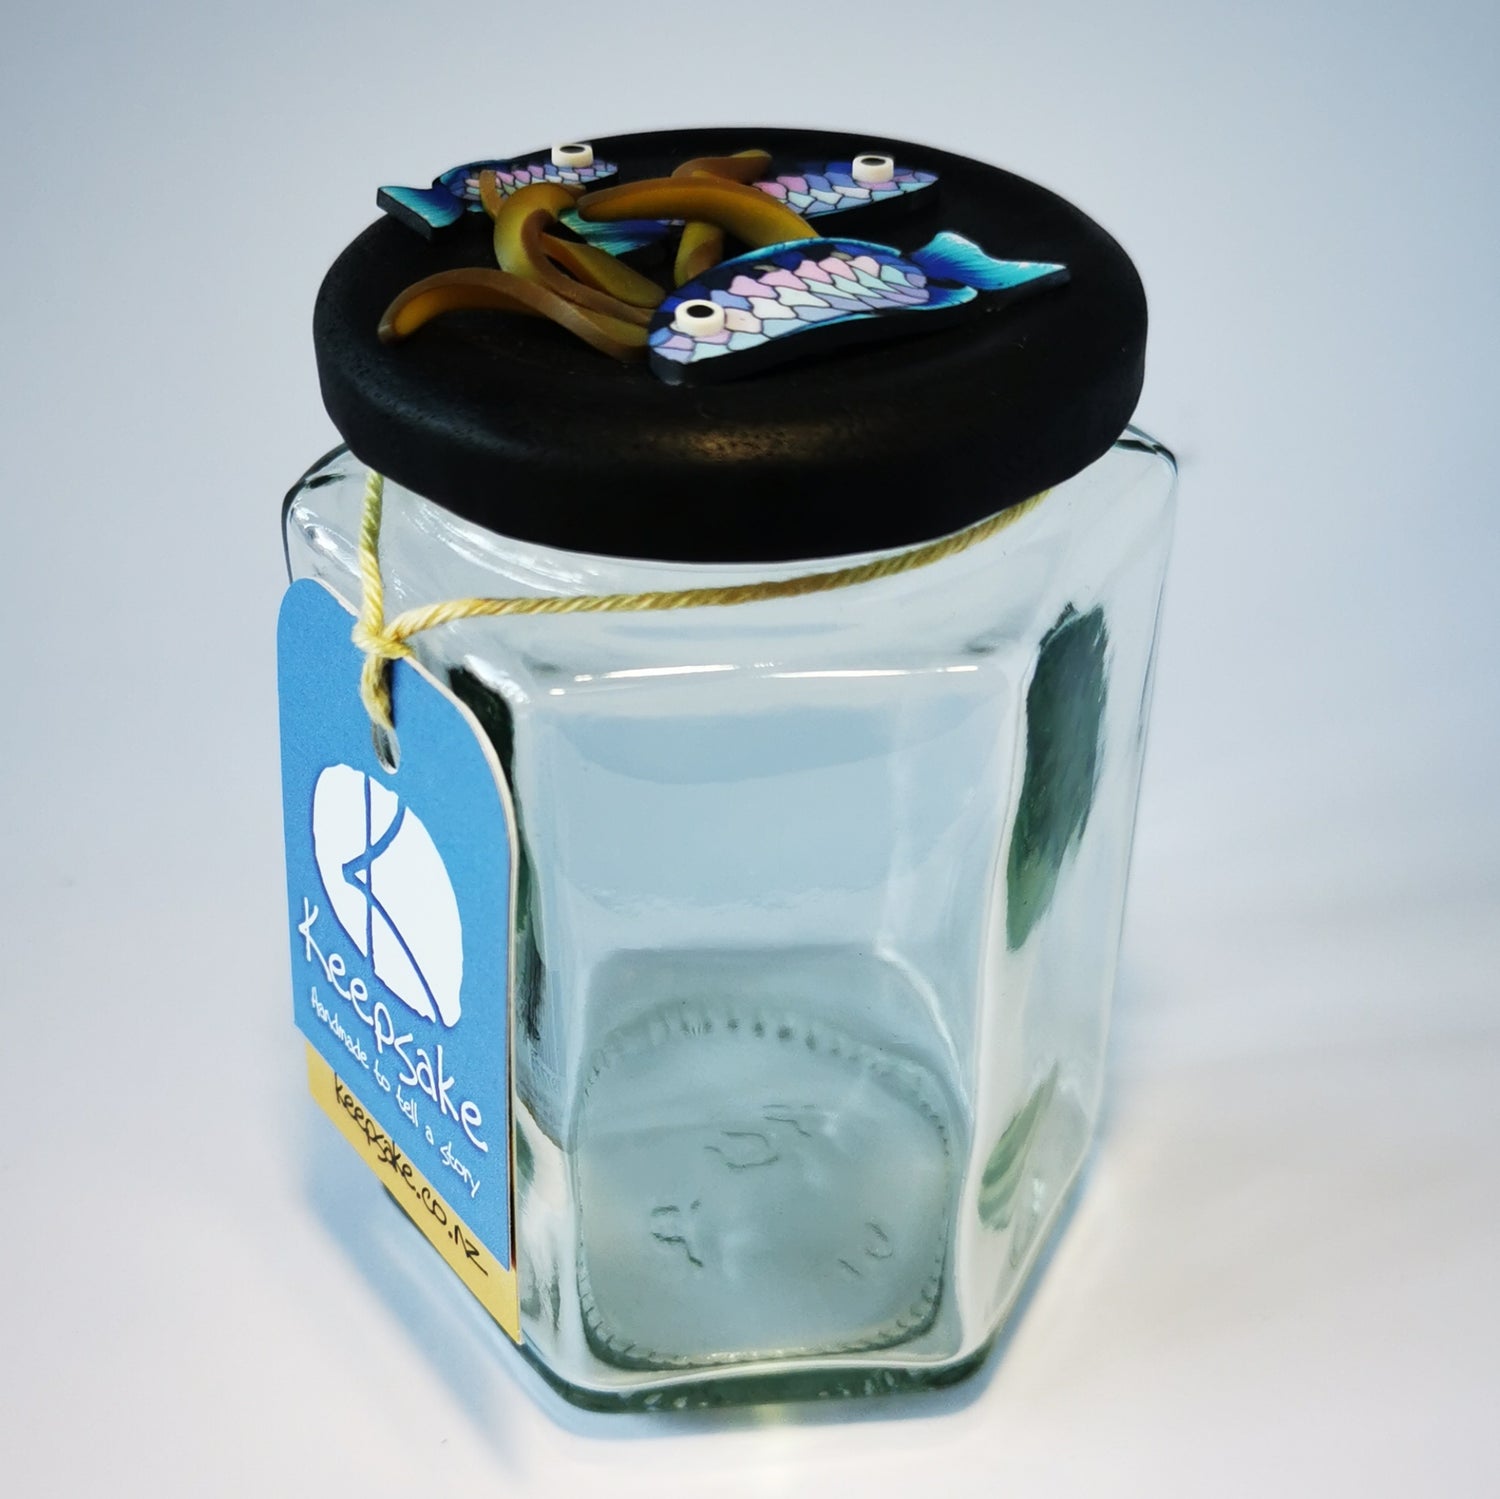 270ml glass hexagonal  jar and lid hand-decorated in New Zealand, with  an air-tight lid decorated with polymer clay snapper fish and kelp. Ready to be filled with kelp powder, sweets or other treasures.